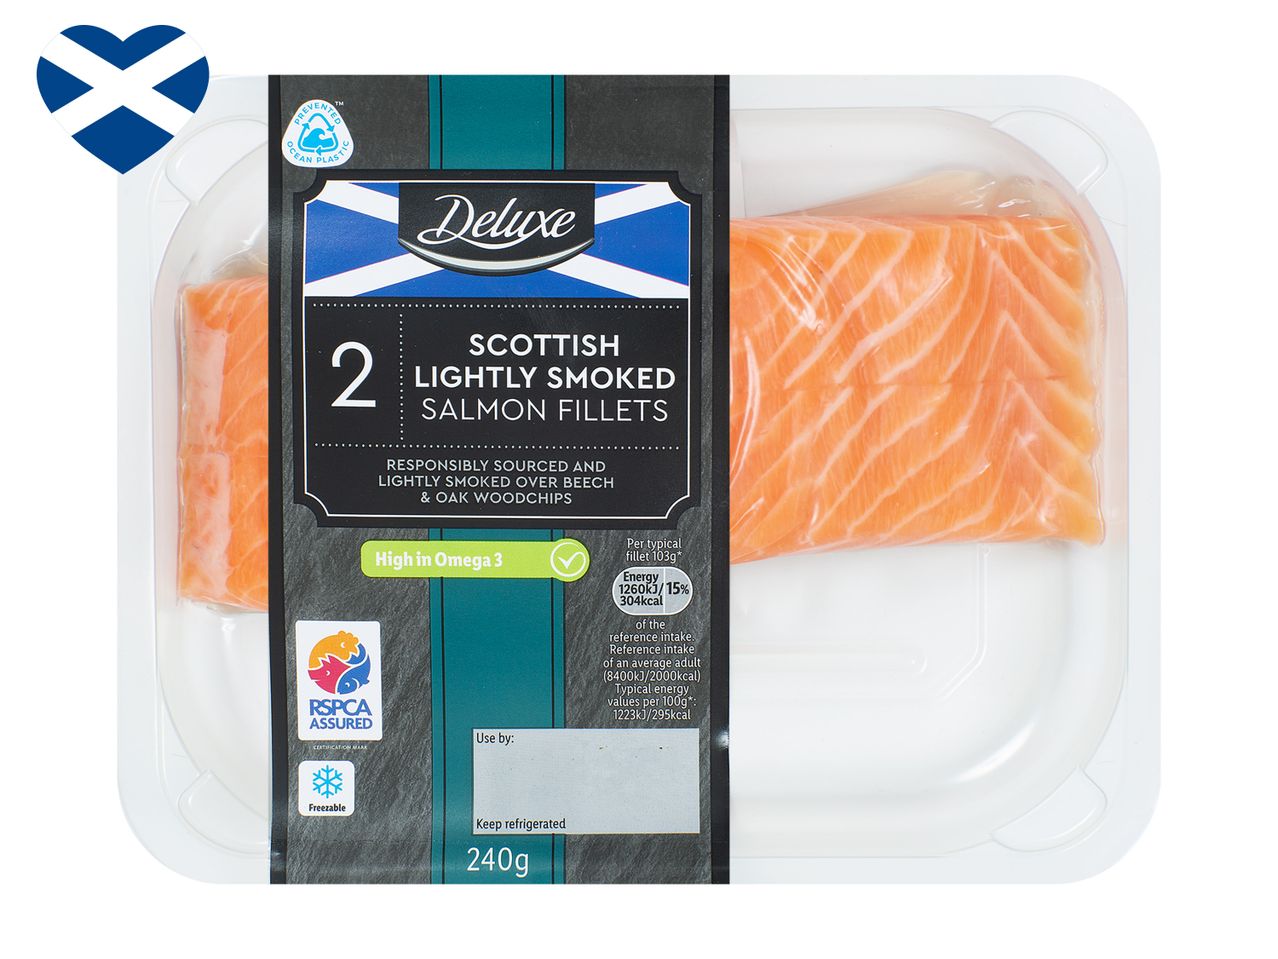 Go to full screen view: Deluxe 2 Scottish Lightly Smoked Salmon Fillets - Image 1